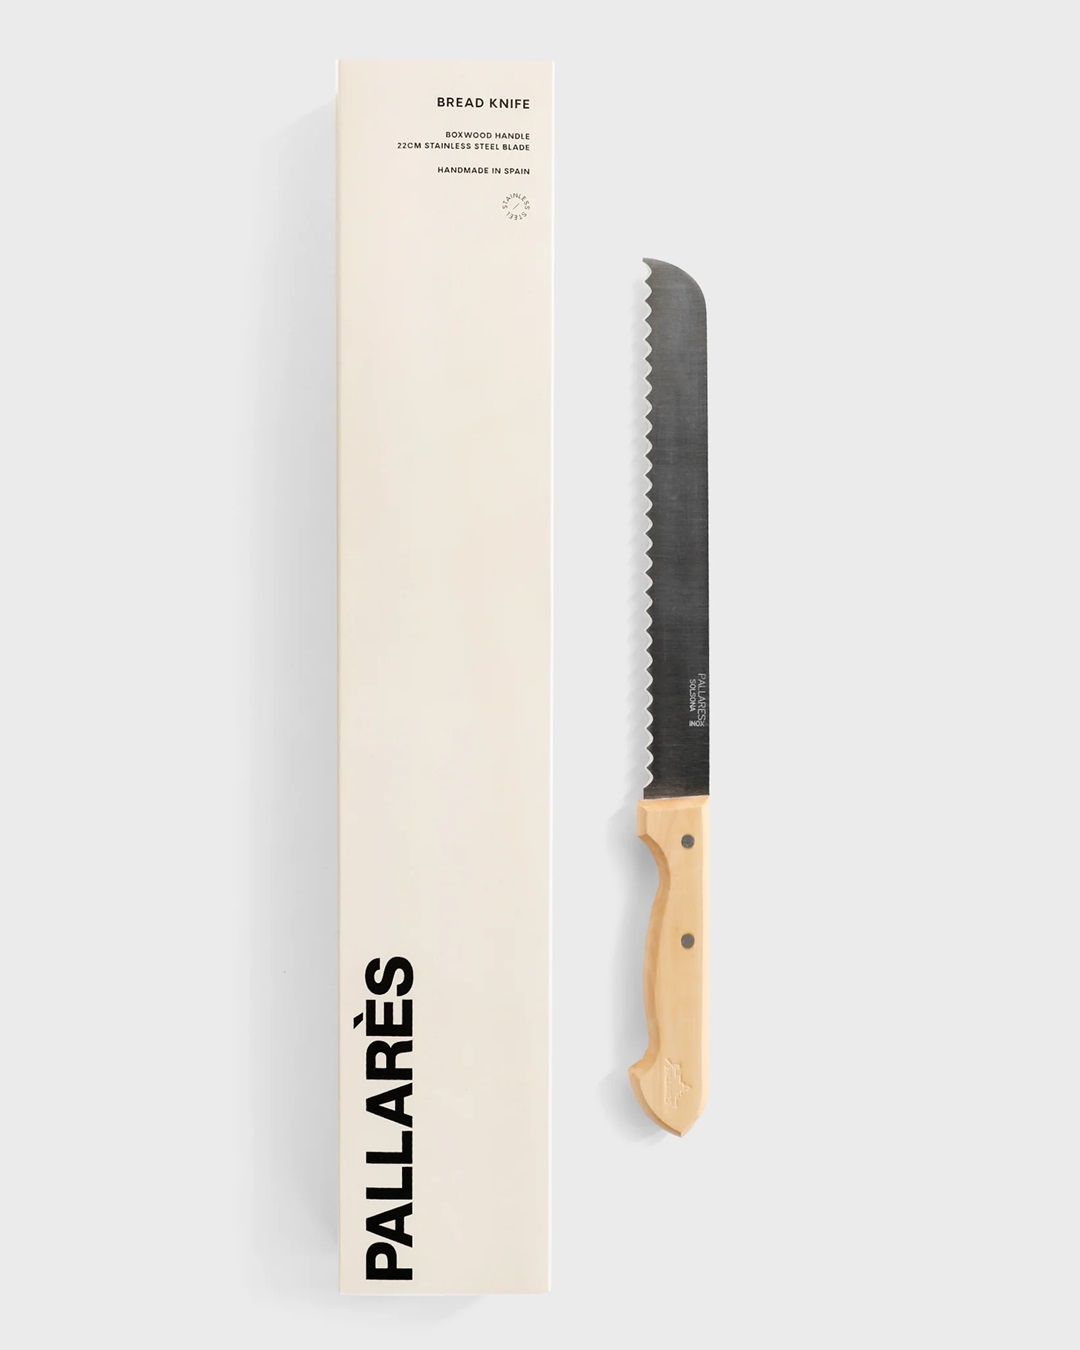 Bread knife with wooden handle next to box